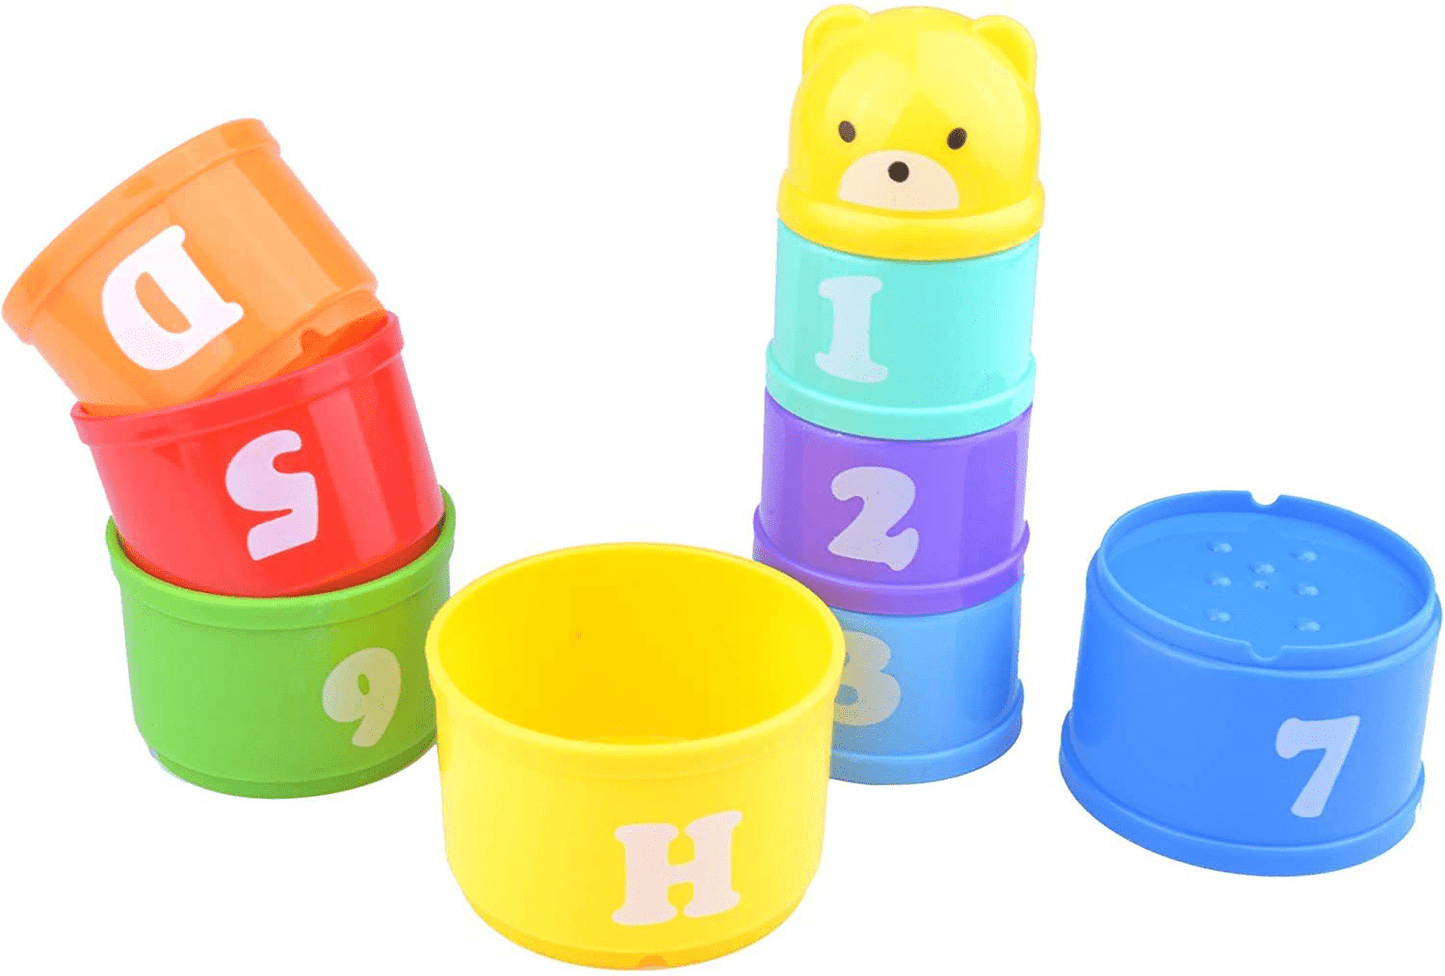 Wontee Bird Educational Stacking Cup Toy Colorful Training Treat Toys for Birds Parrots Animals & Pet Supplies > Pet Supplies > Bird Supplies > Bird Treats Wontee   